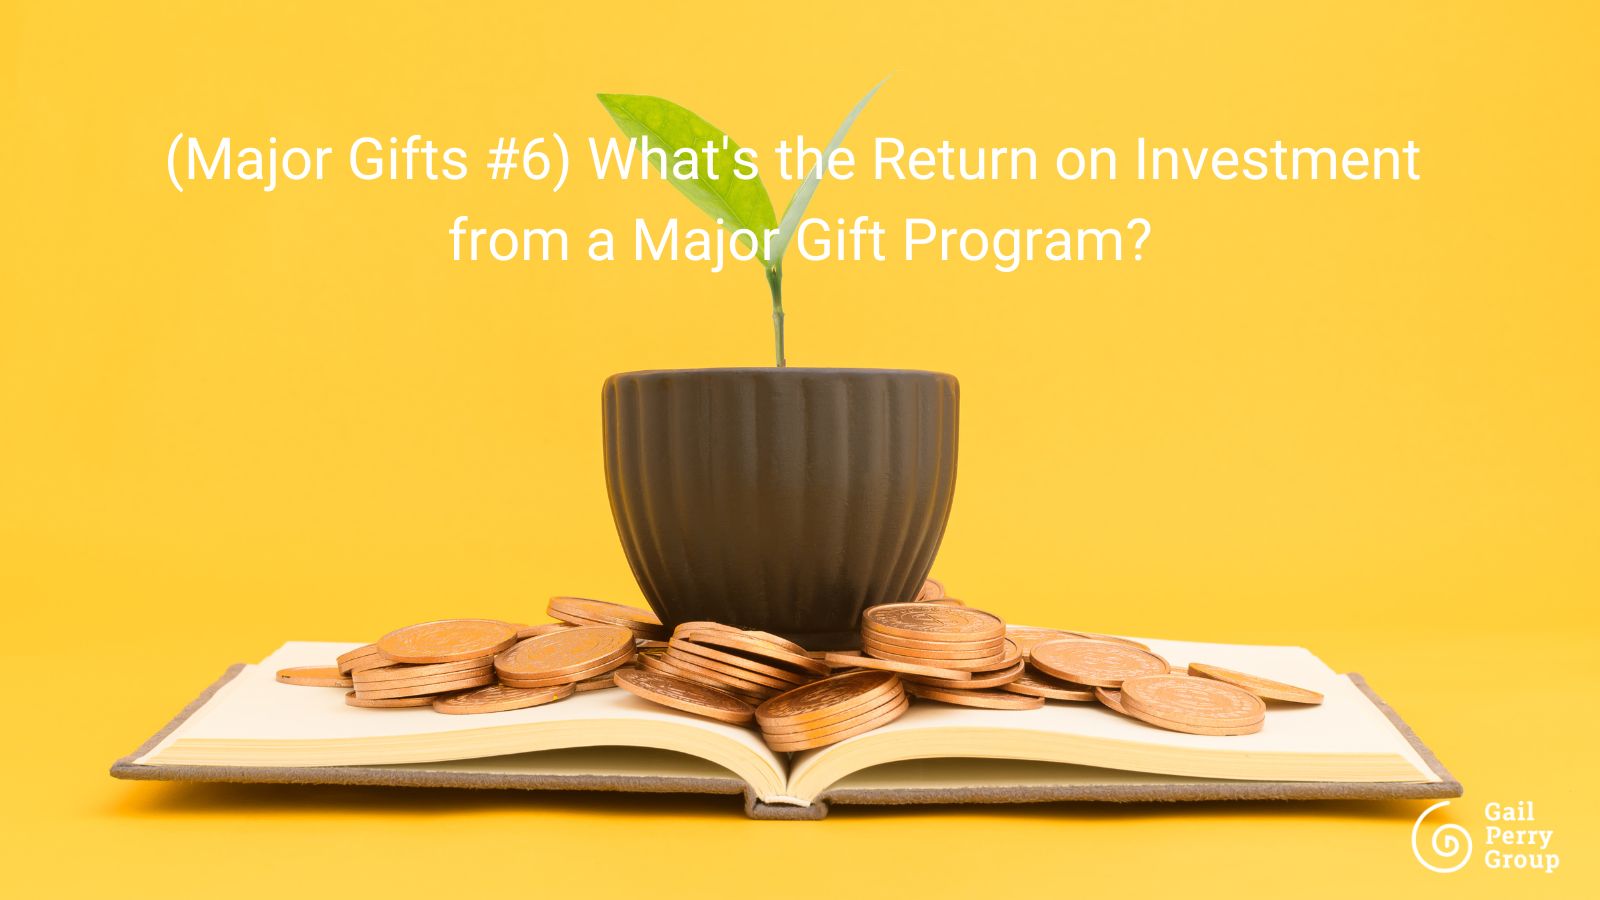 (Major Gifts #6) What's the Return on Investment from a Major Gift Program?